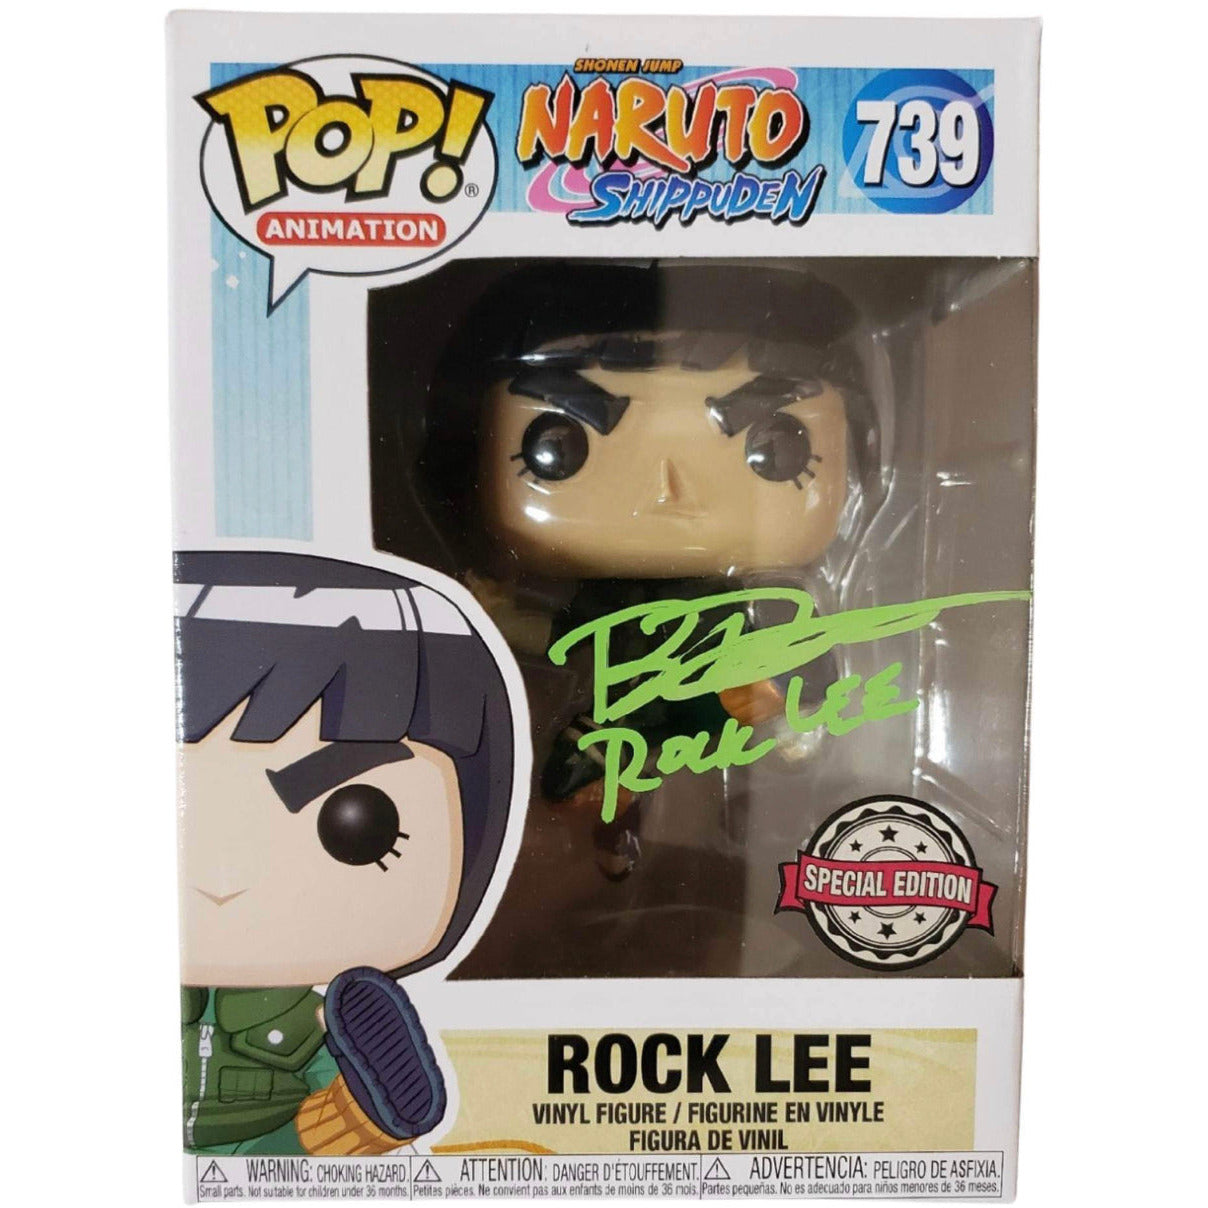 FUNKO POP! AUTOGRAPHED ROCK LEE NARUTO SHIPPUDEN #739 IN STOCK